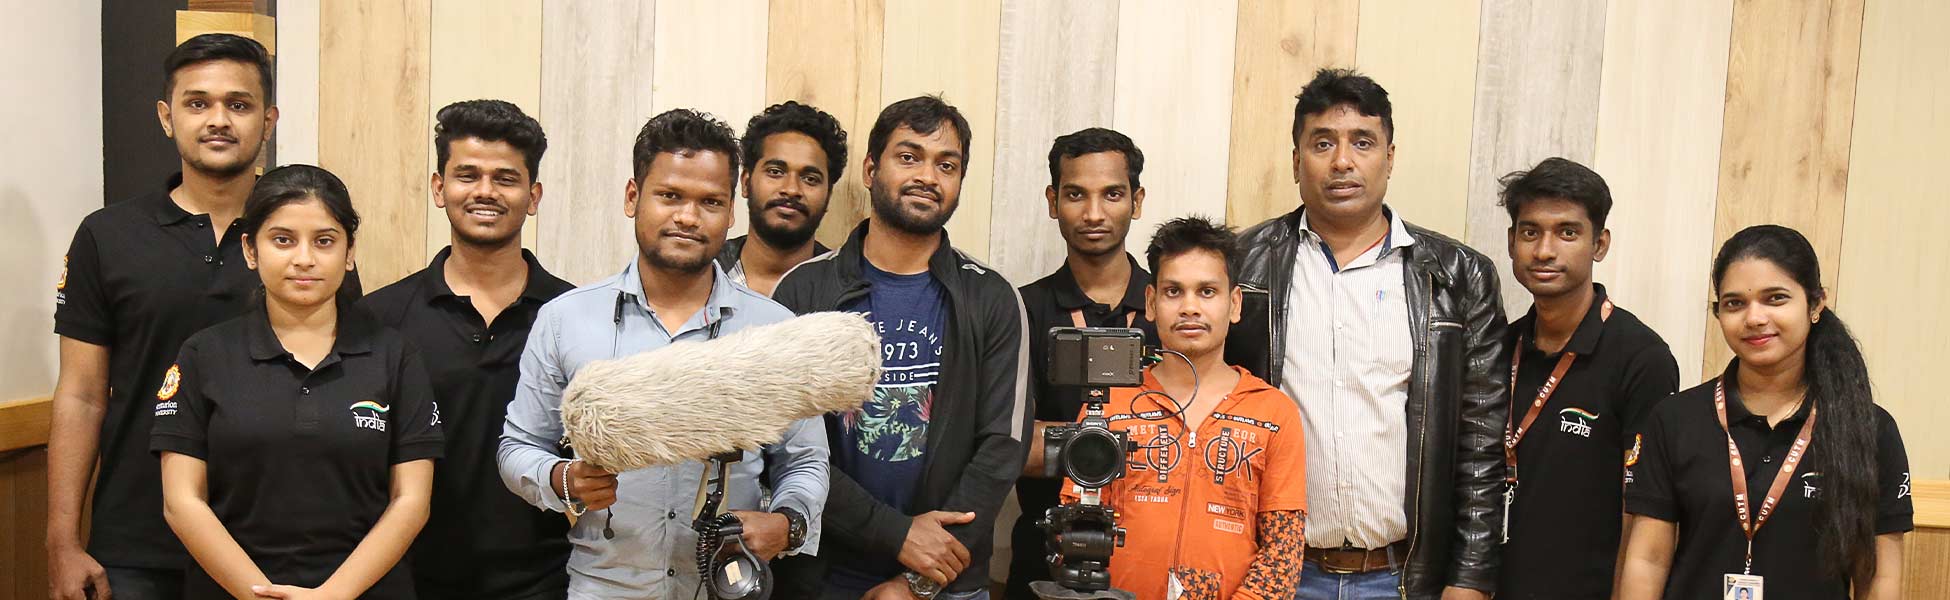 film production services in Kra Daadi, video production services in Kra Daadi, tv production services in Kra Daadi, production services in Kra Daadi